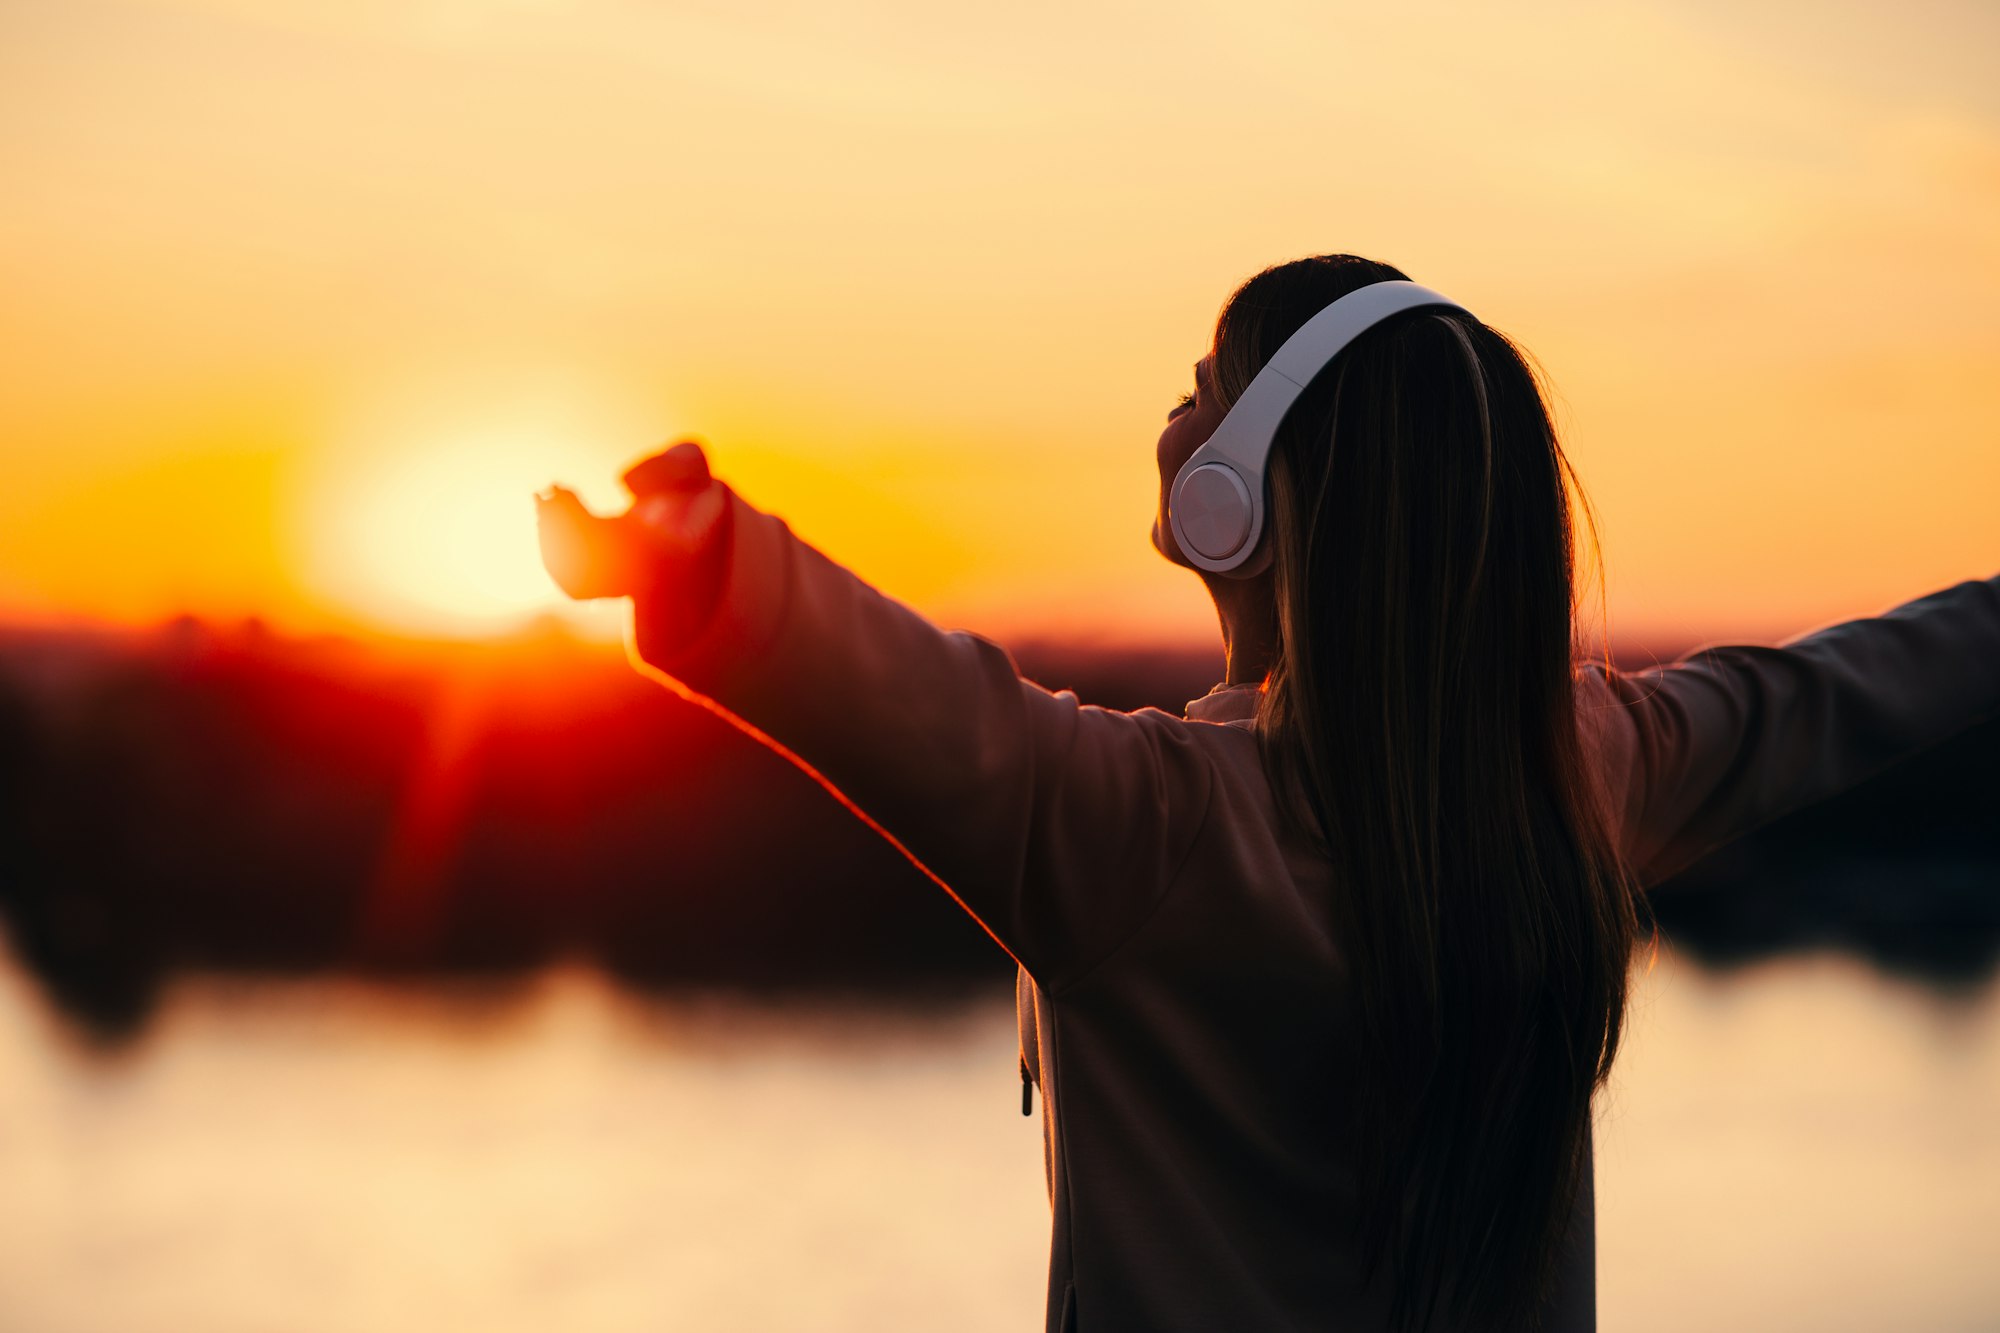 Young woman watching the sunset while listening to music via headphones